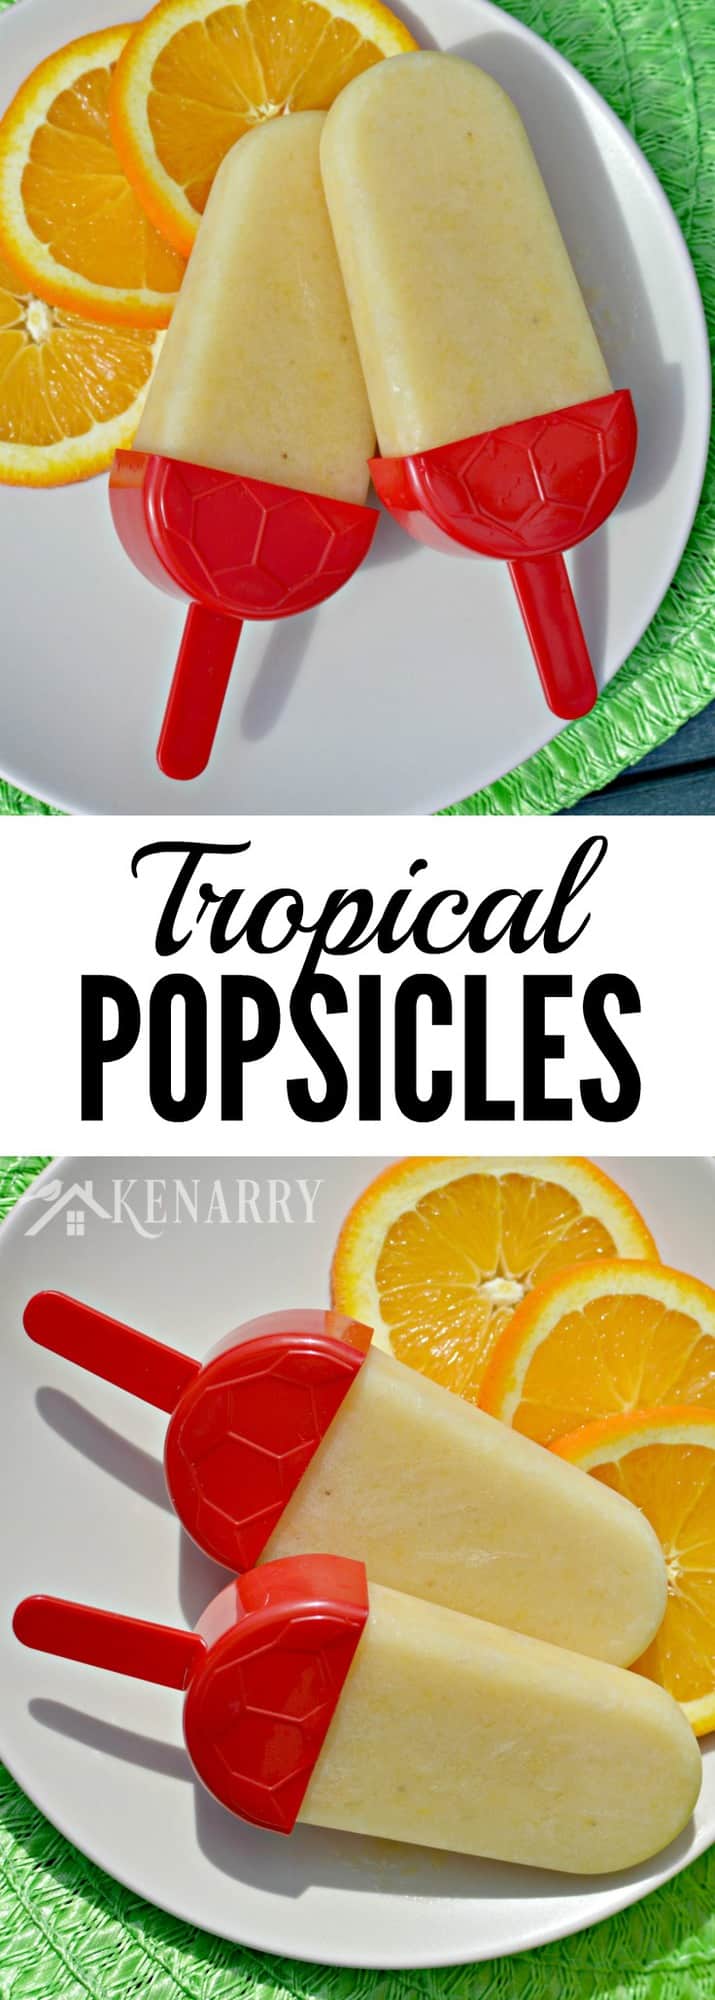 two Popsicles on a plate with sliced oranges